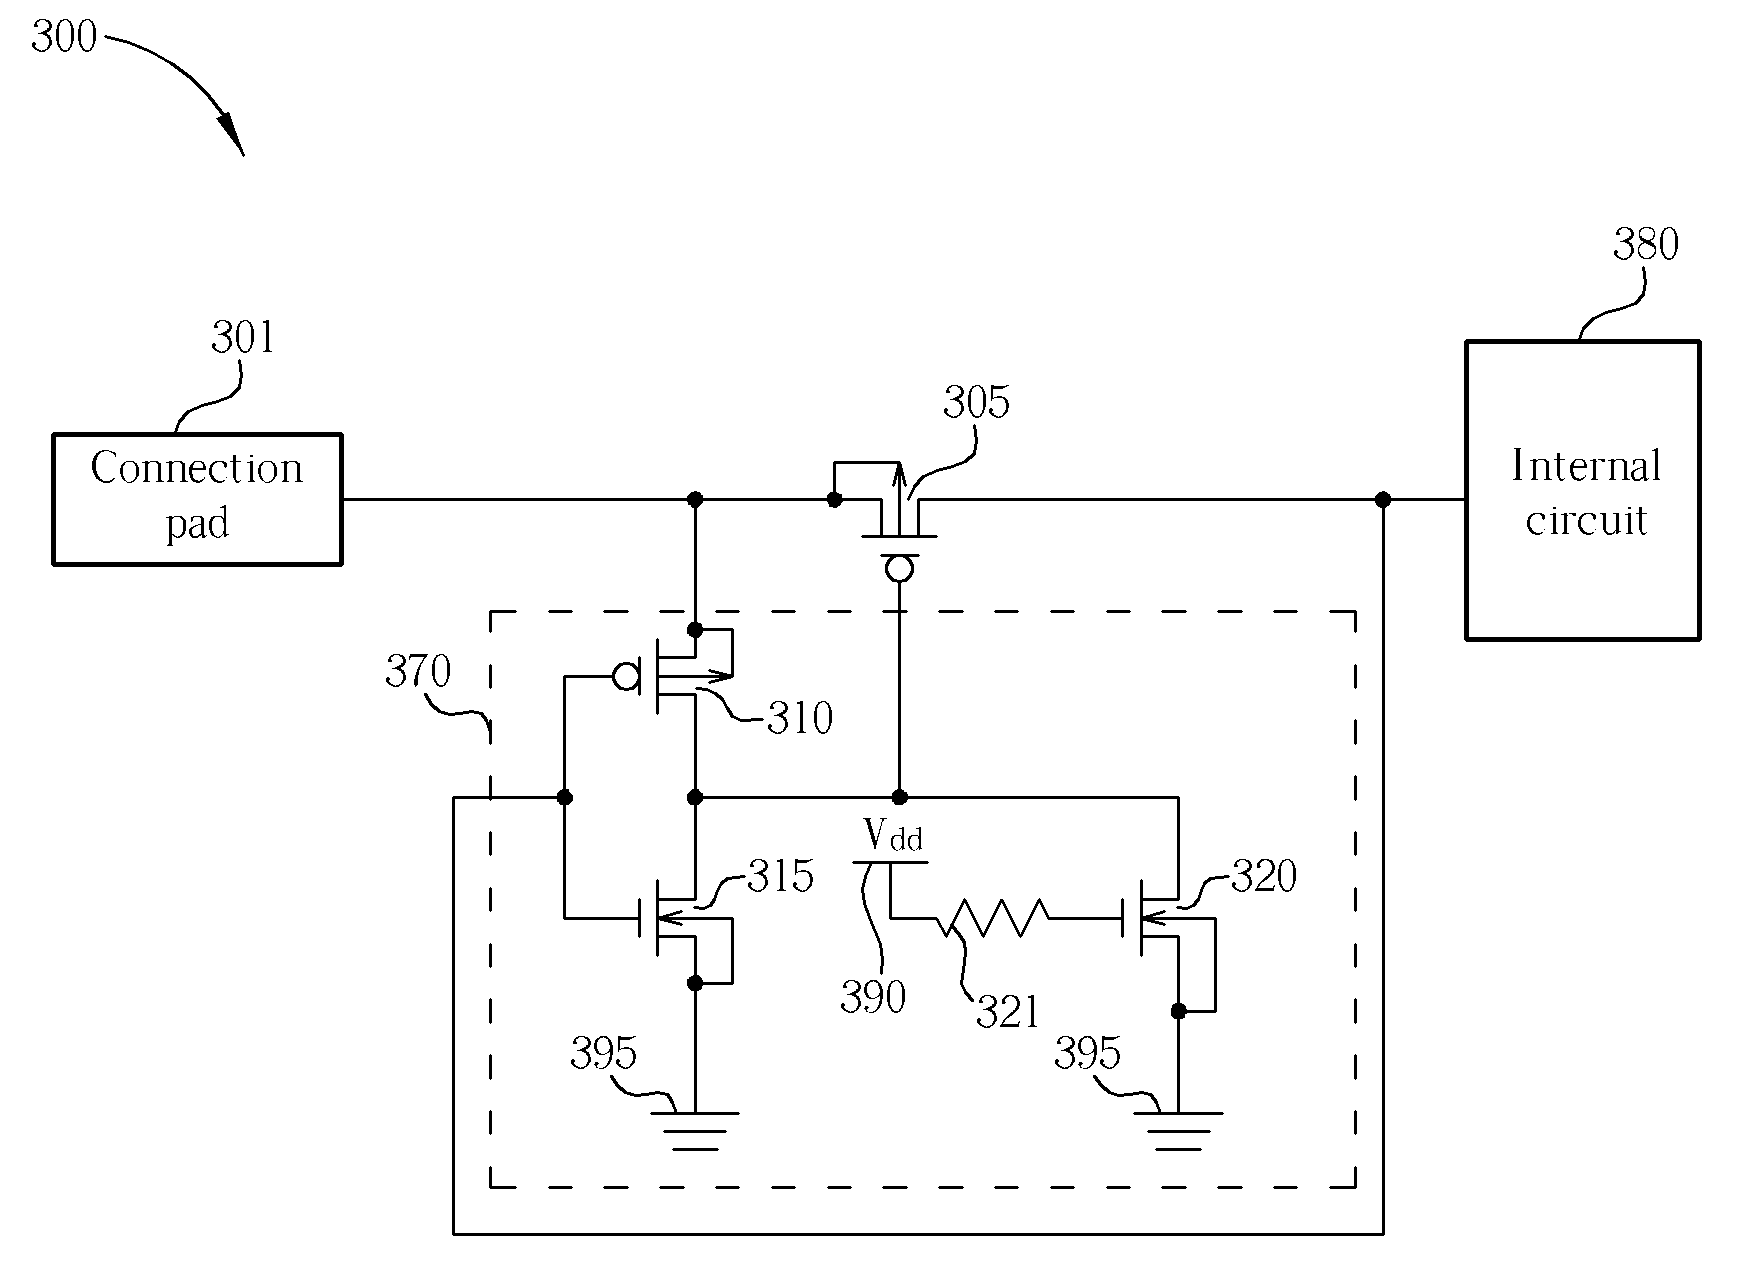 ESD avoiding circuits based on the ESD detectors in a feedback loop